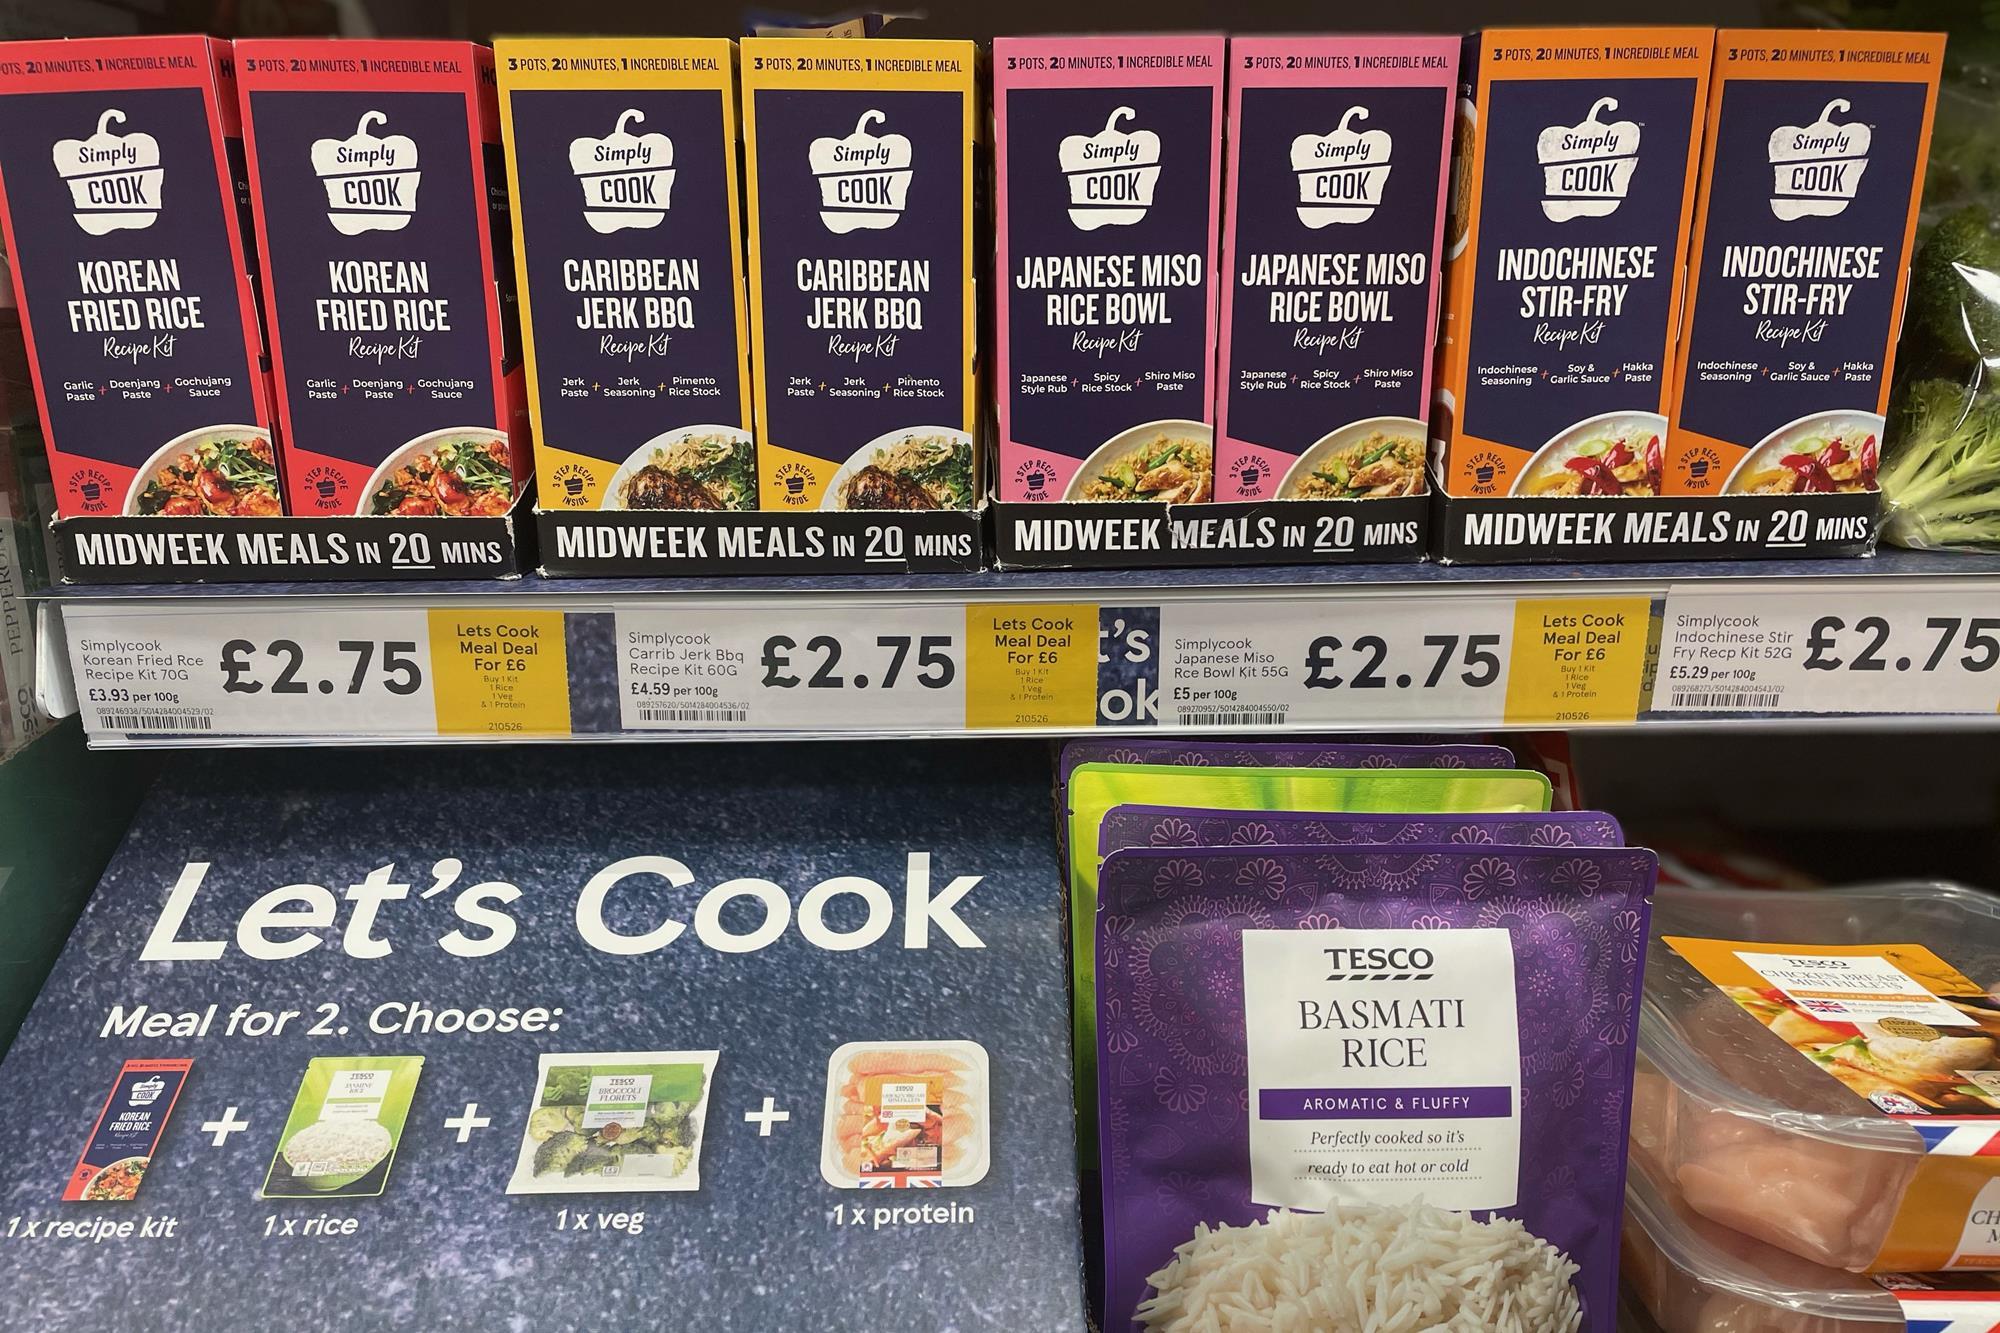 Tesco links with SimplyCook for 'Let's Cook' in-store meal kits, News